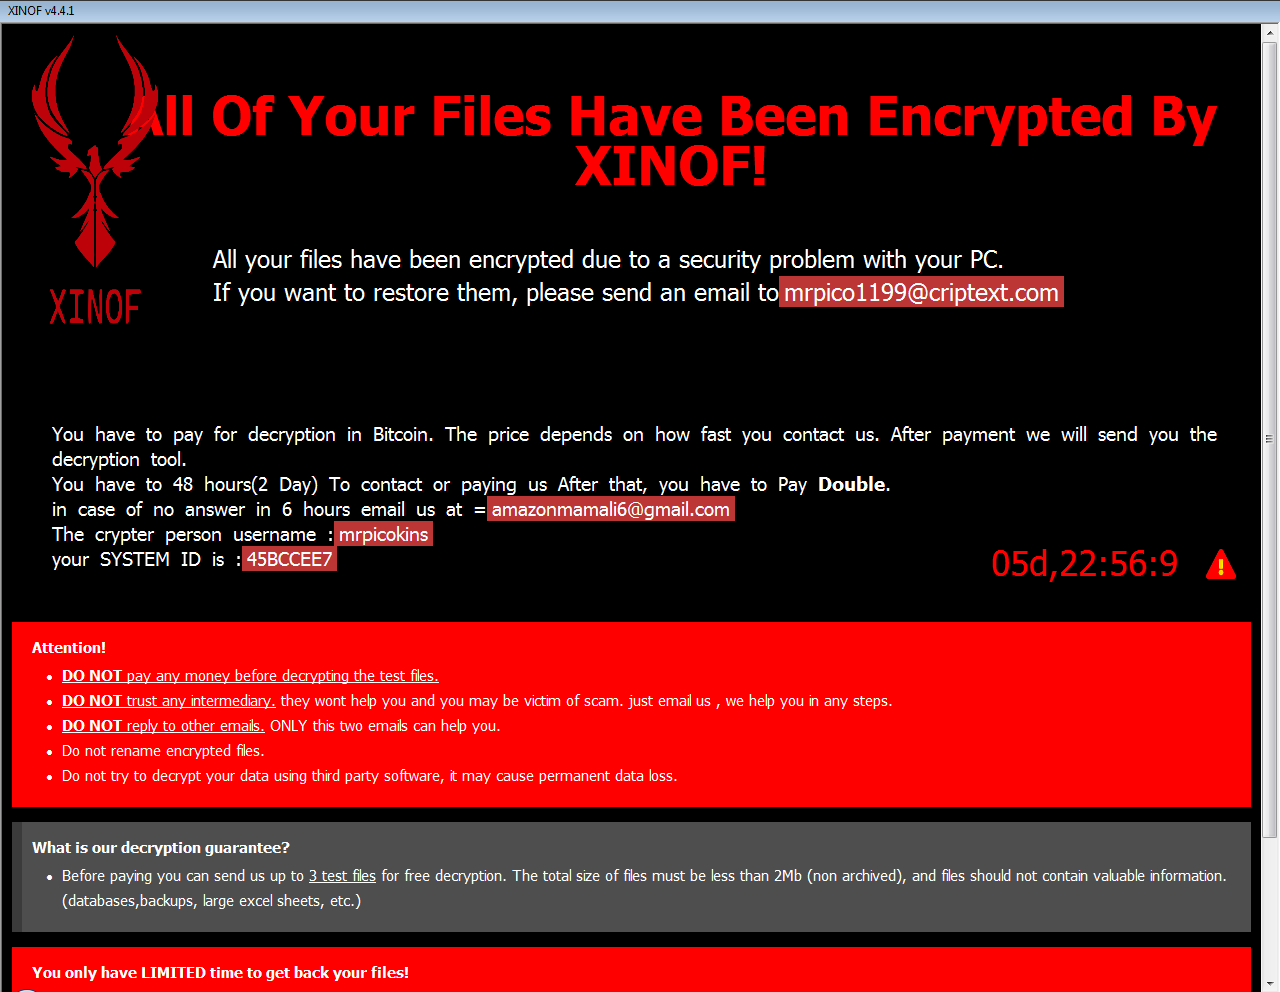 DeezNuts Crypter Ransomware - Decryption, removal, and lost files recovery